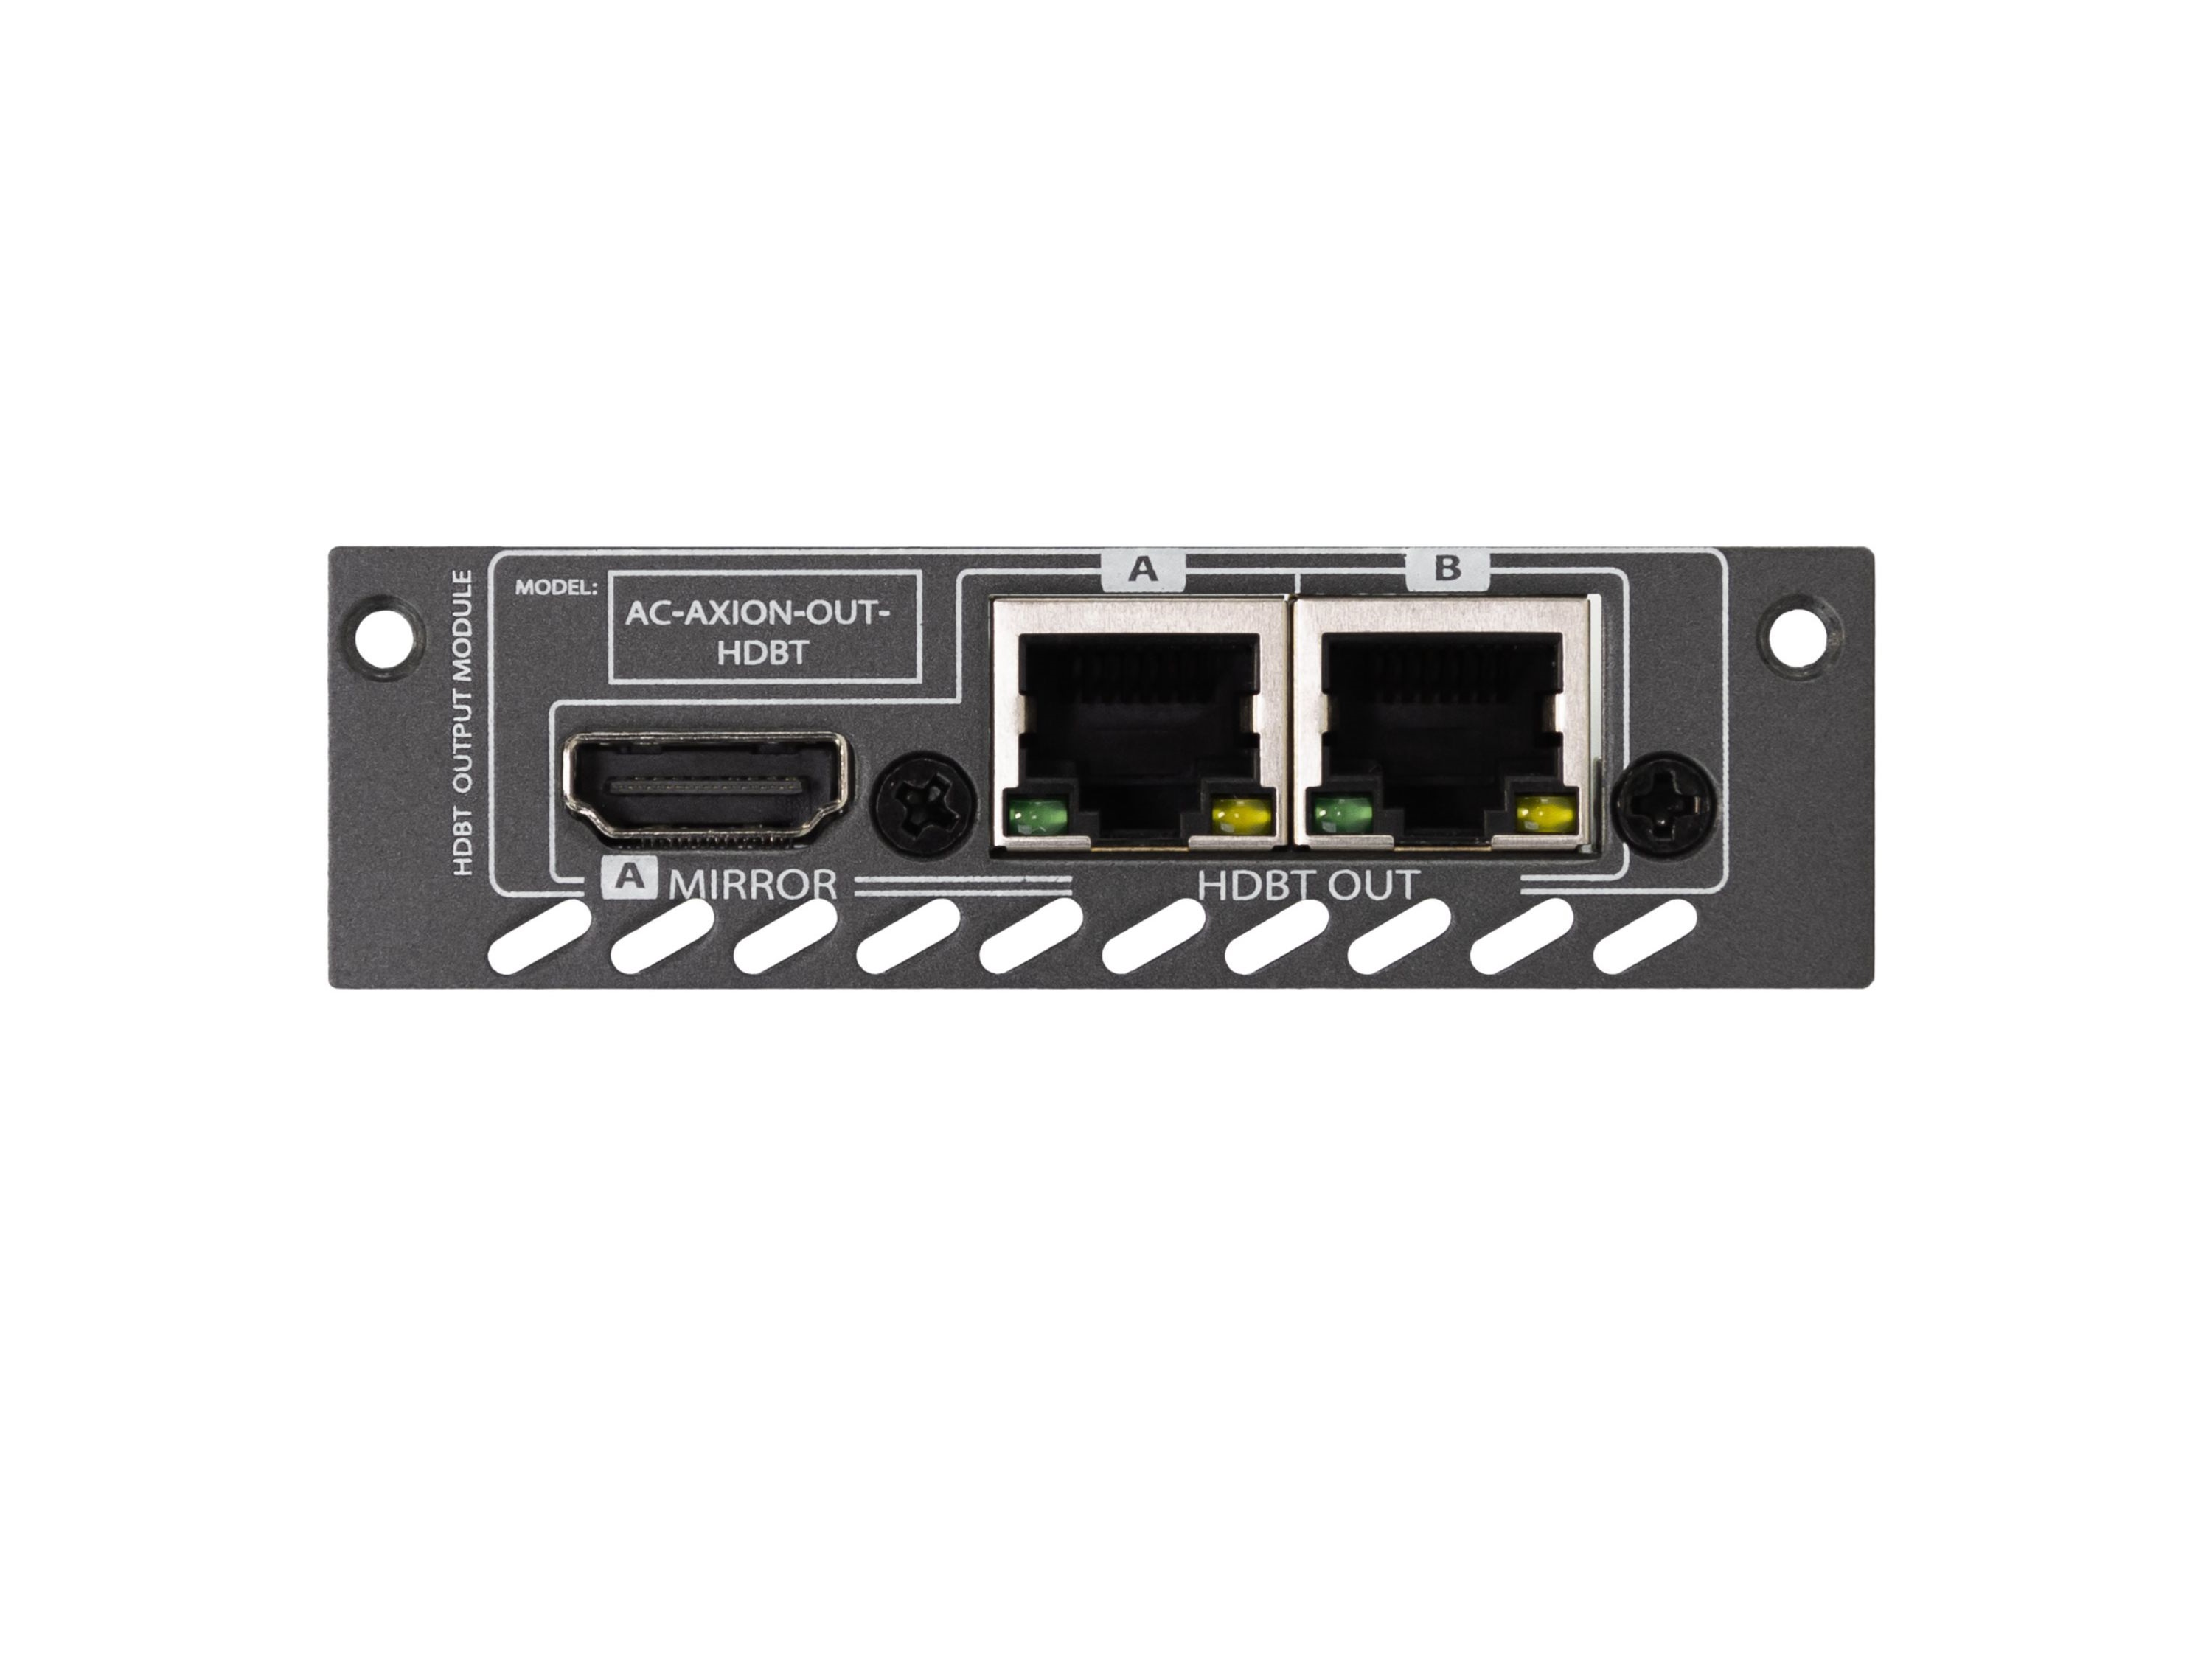 AC-AXION-OUT-HDBT Dual 18Gbps ICT HDBaseT Output Ports with Single Mirrored HDMI Port Card by AVPro Edge